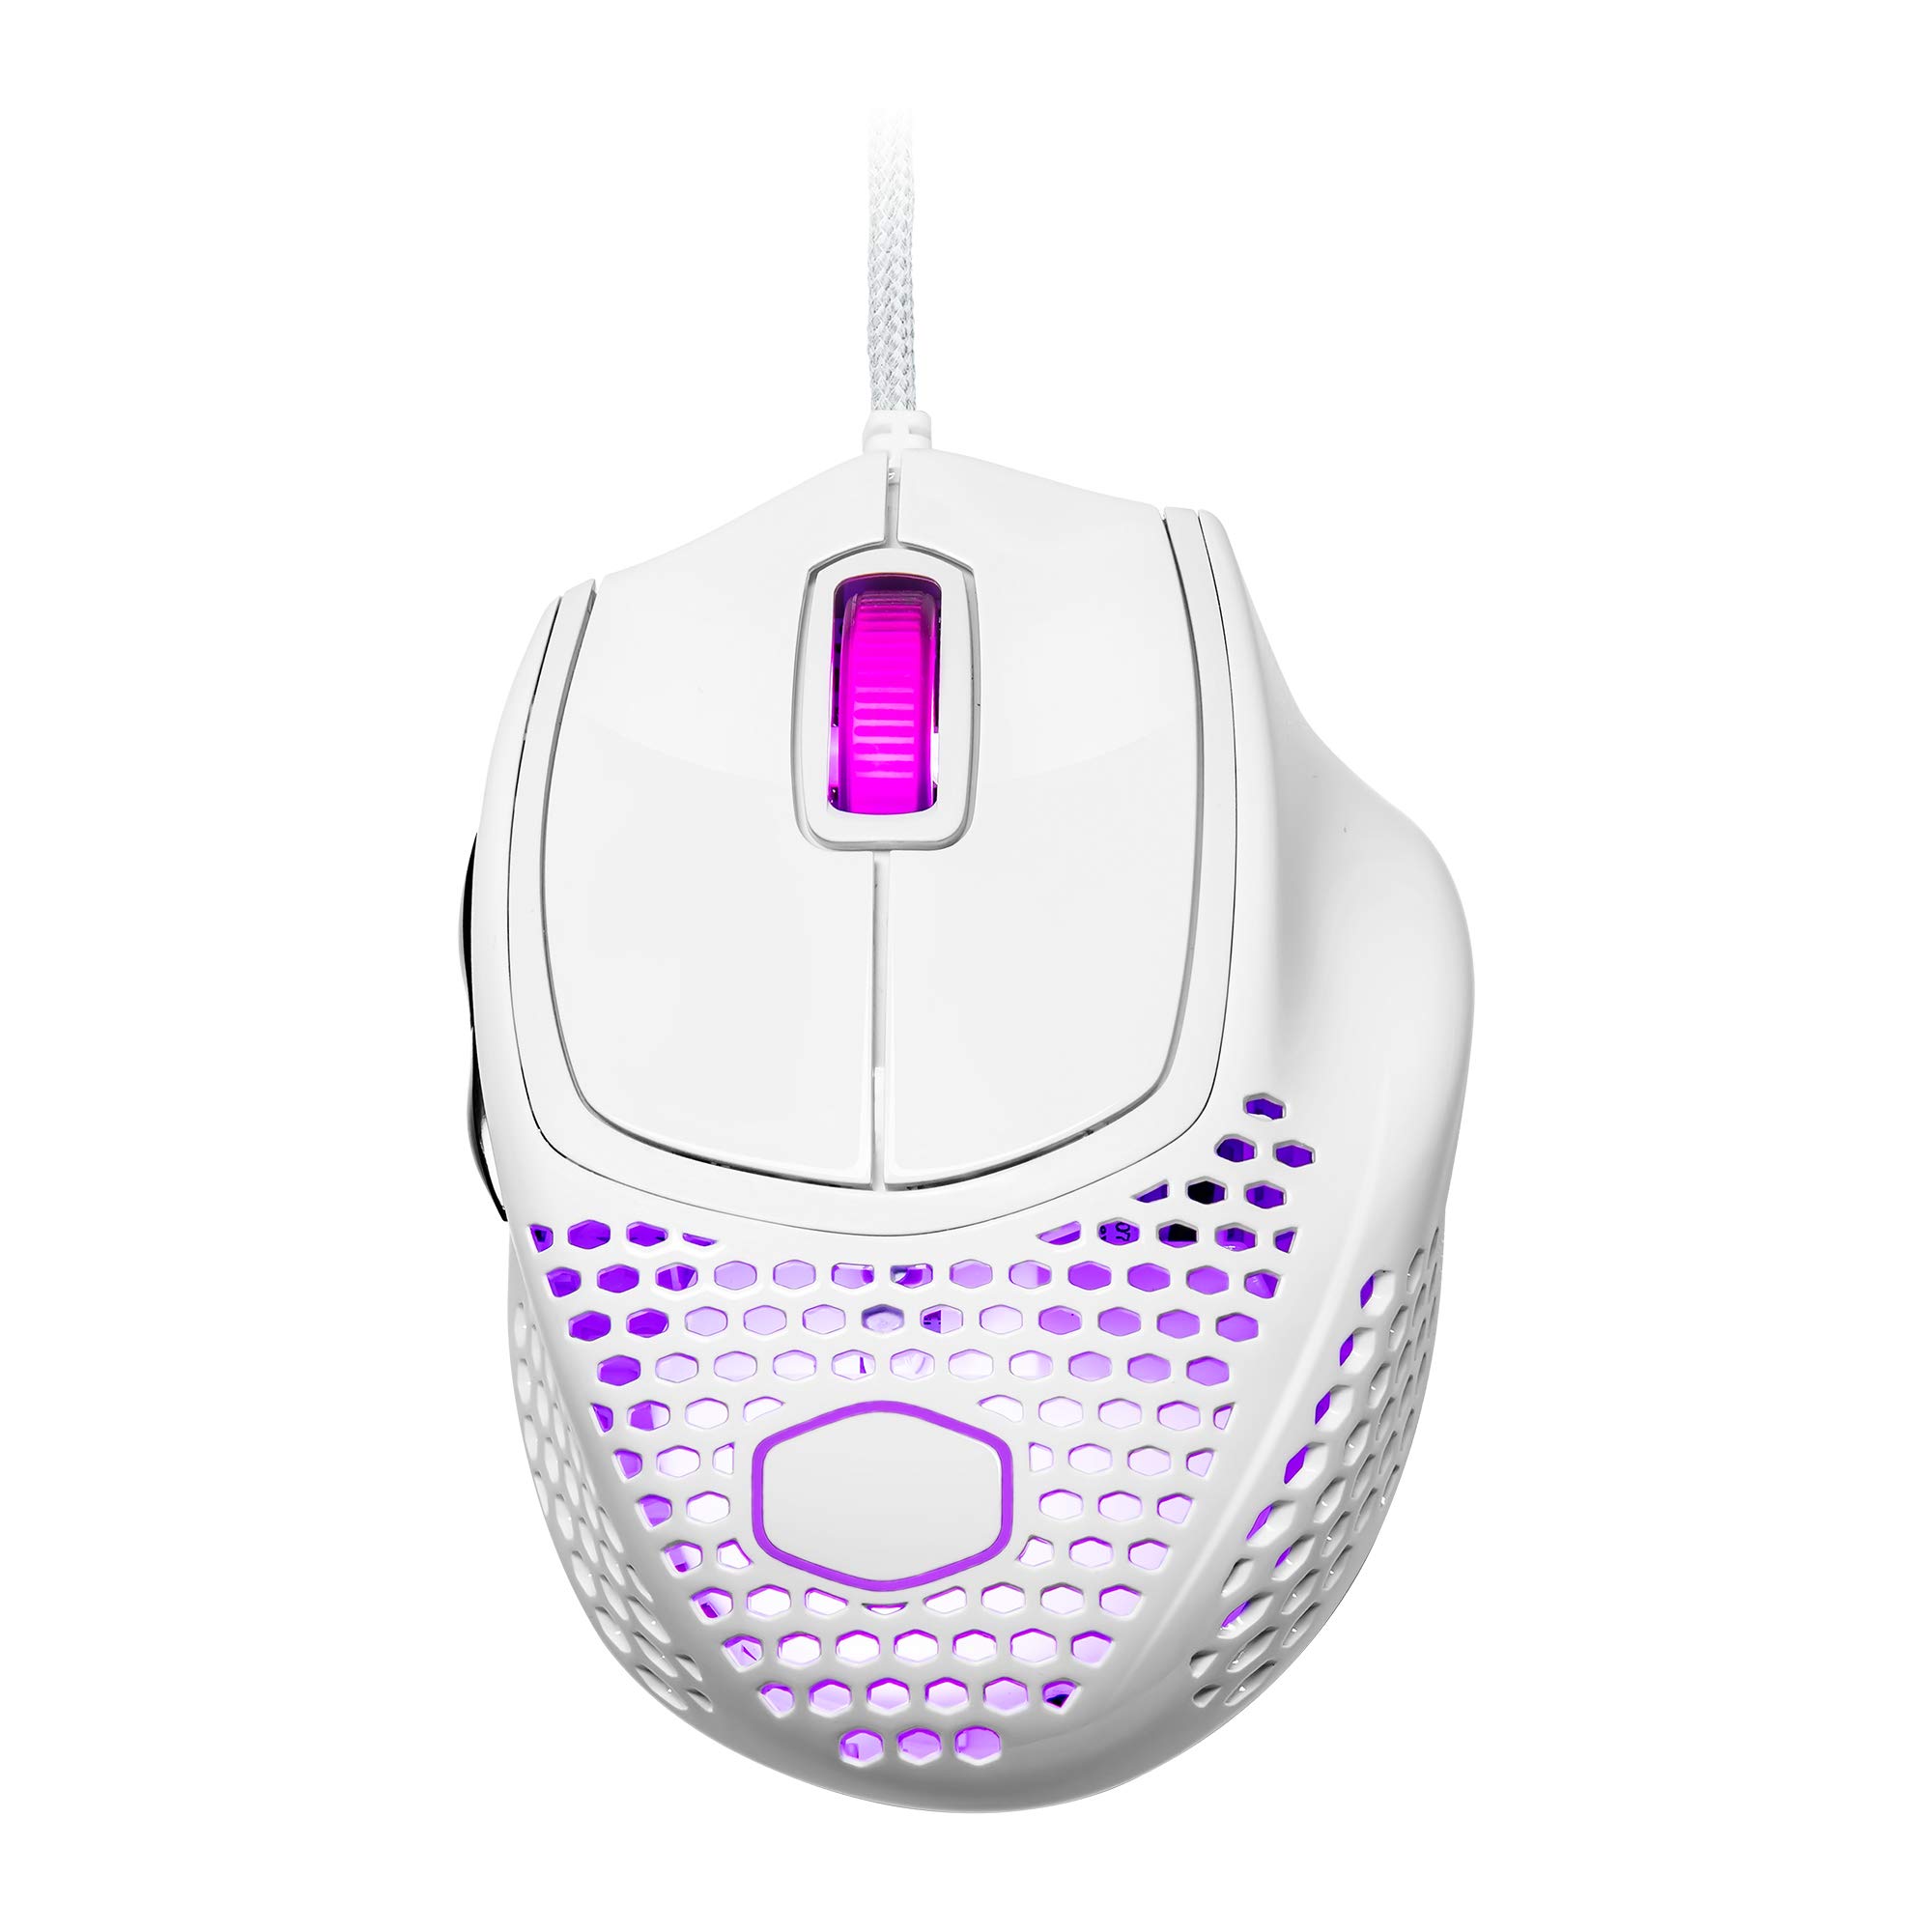 Cooler Master MM720 Lightweight Gaming Mouse (Glossy White) $15 + Free Shipping w/ Prime or on $35+